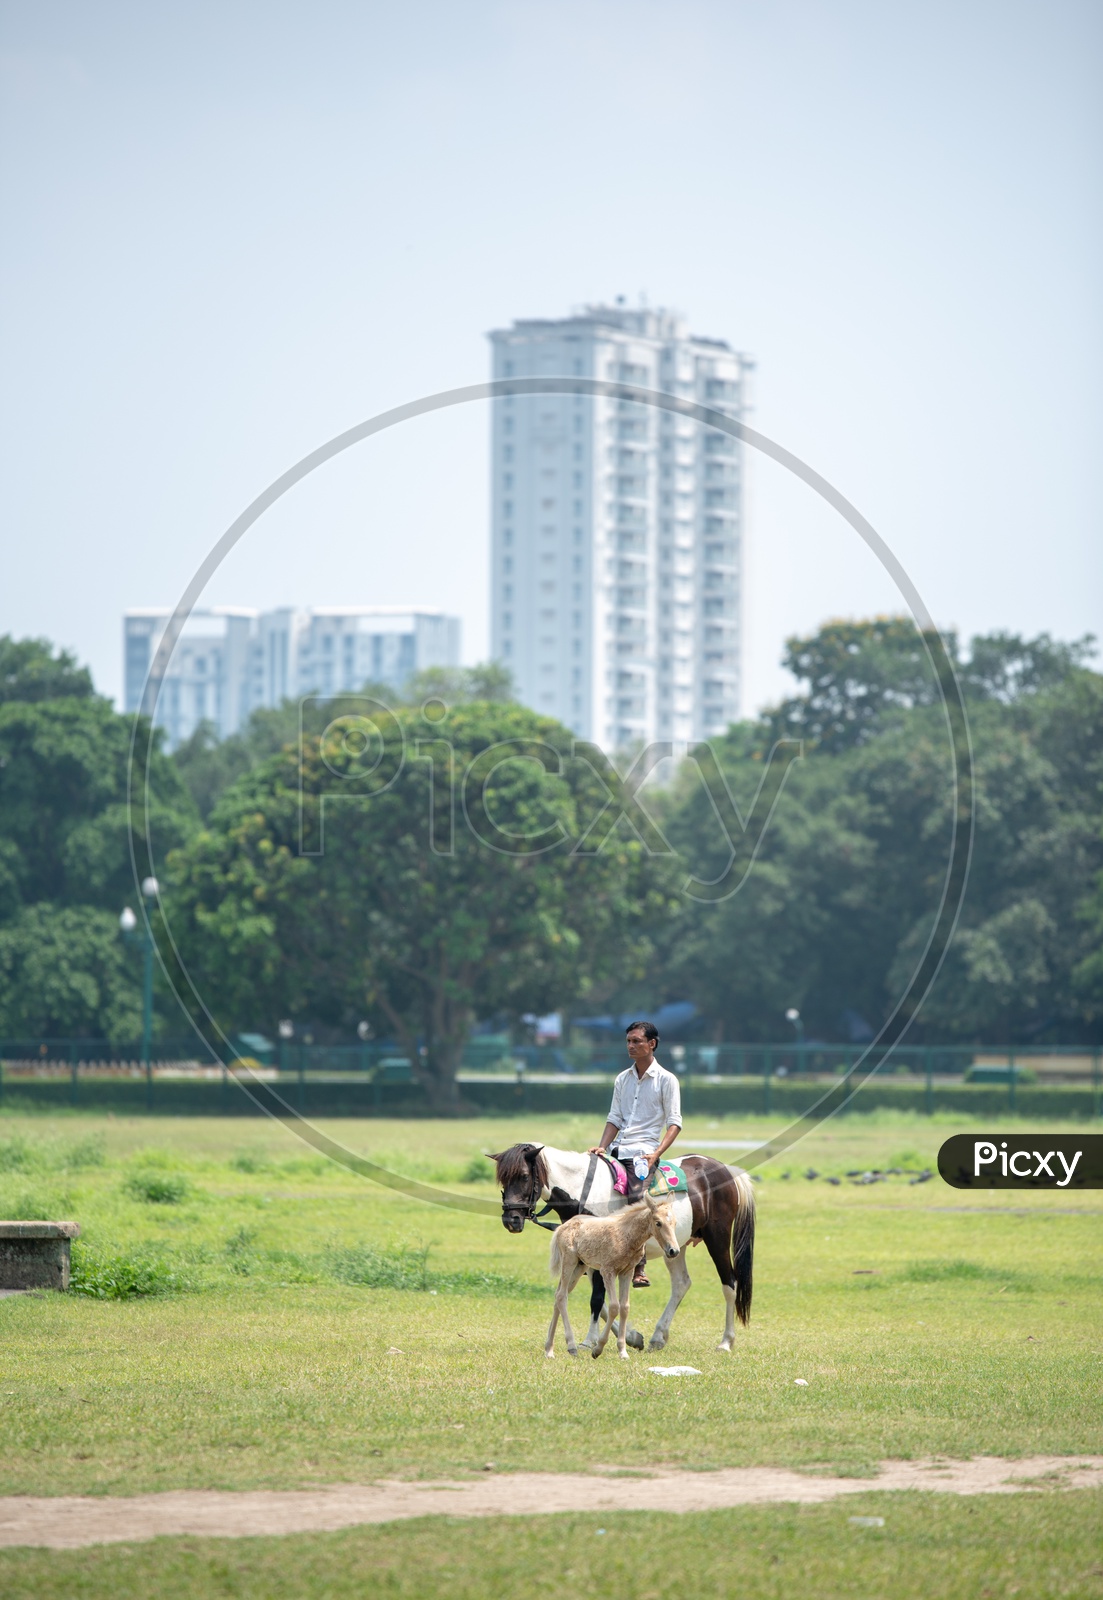 A Man Riding On a Horse In a Park